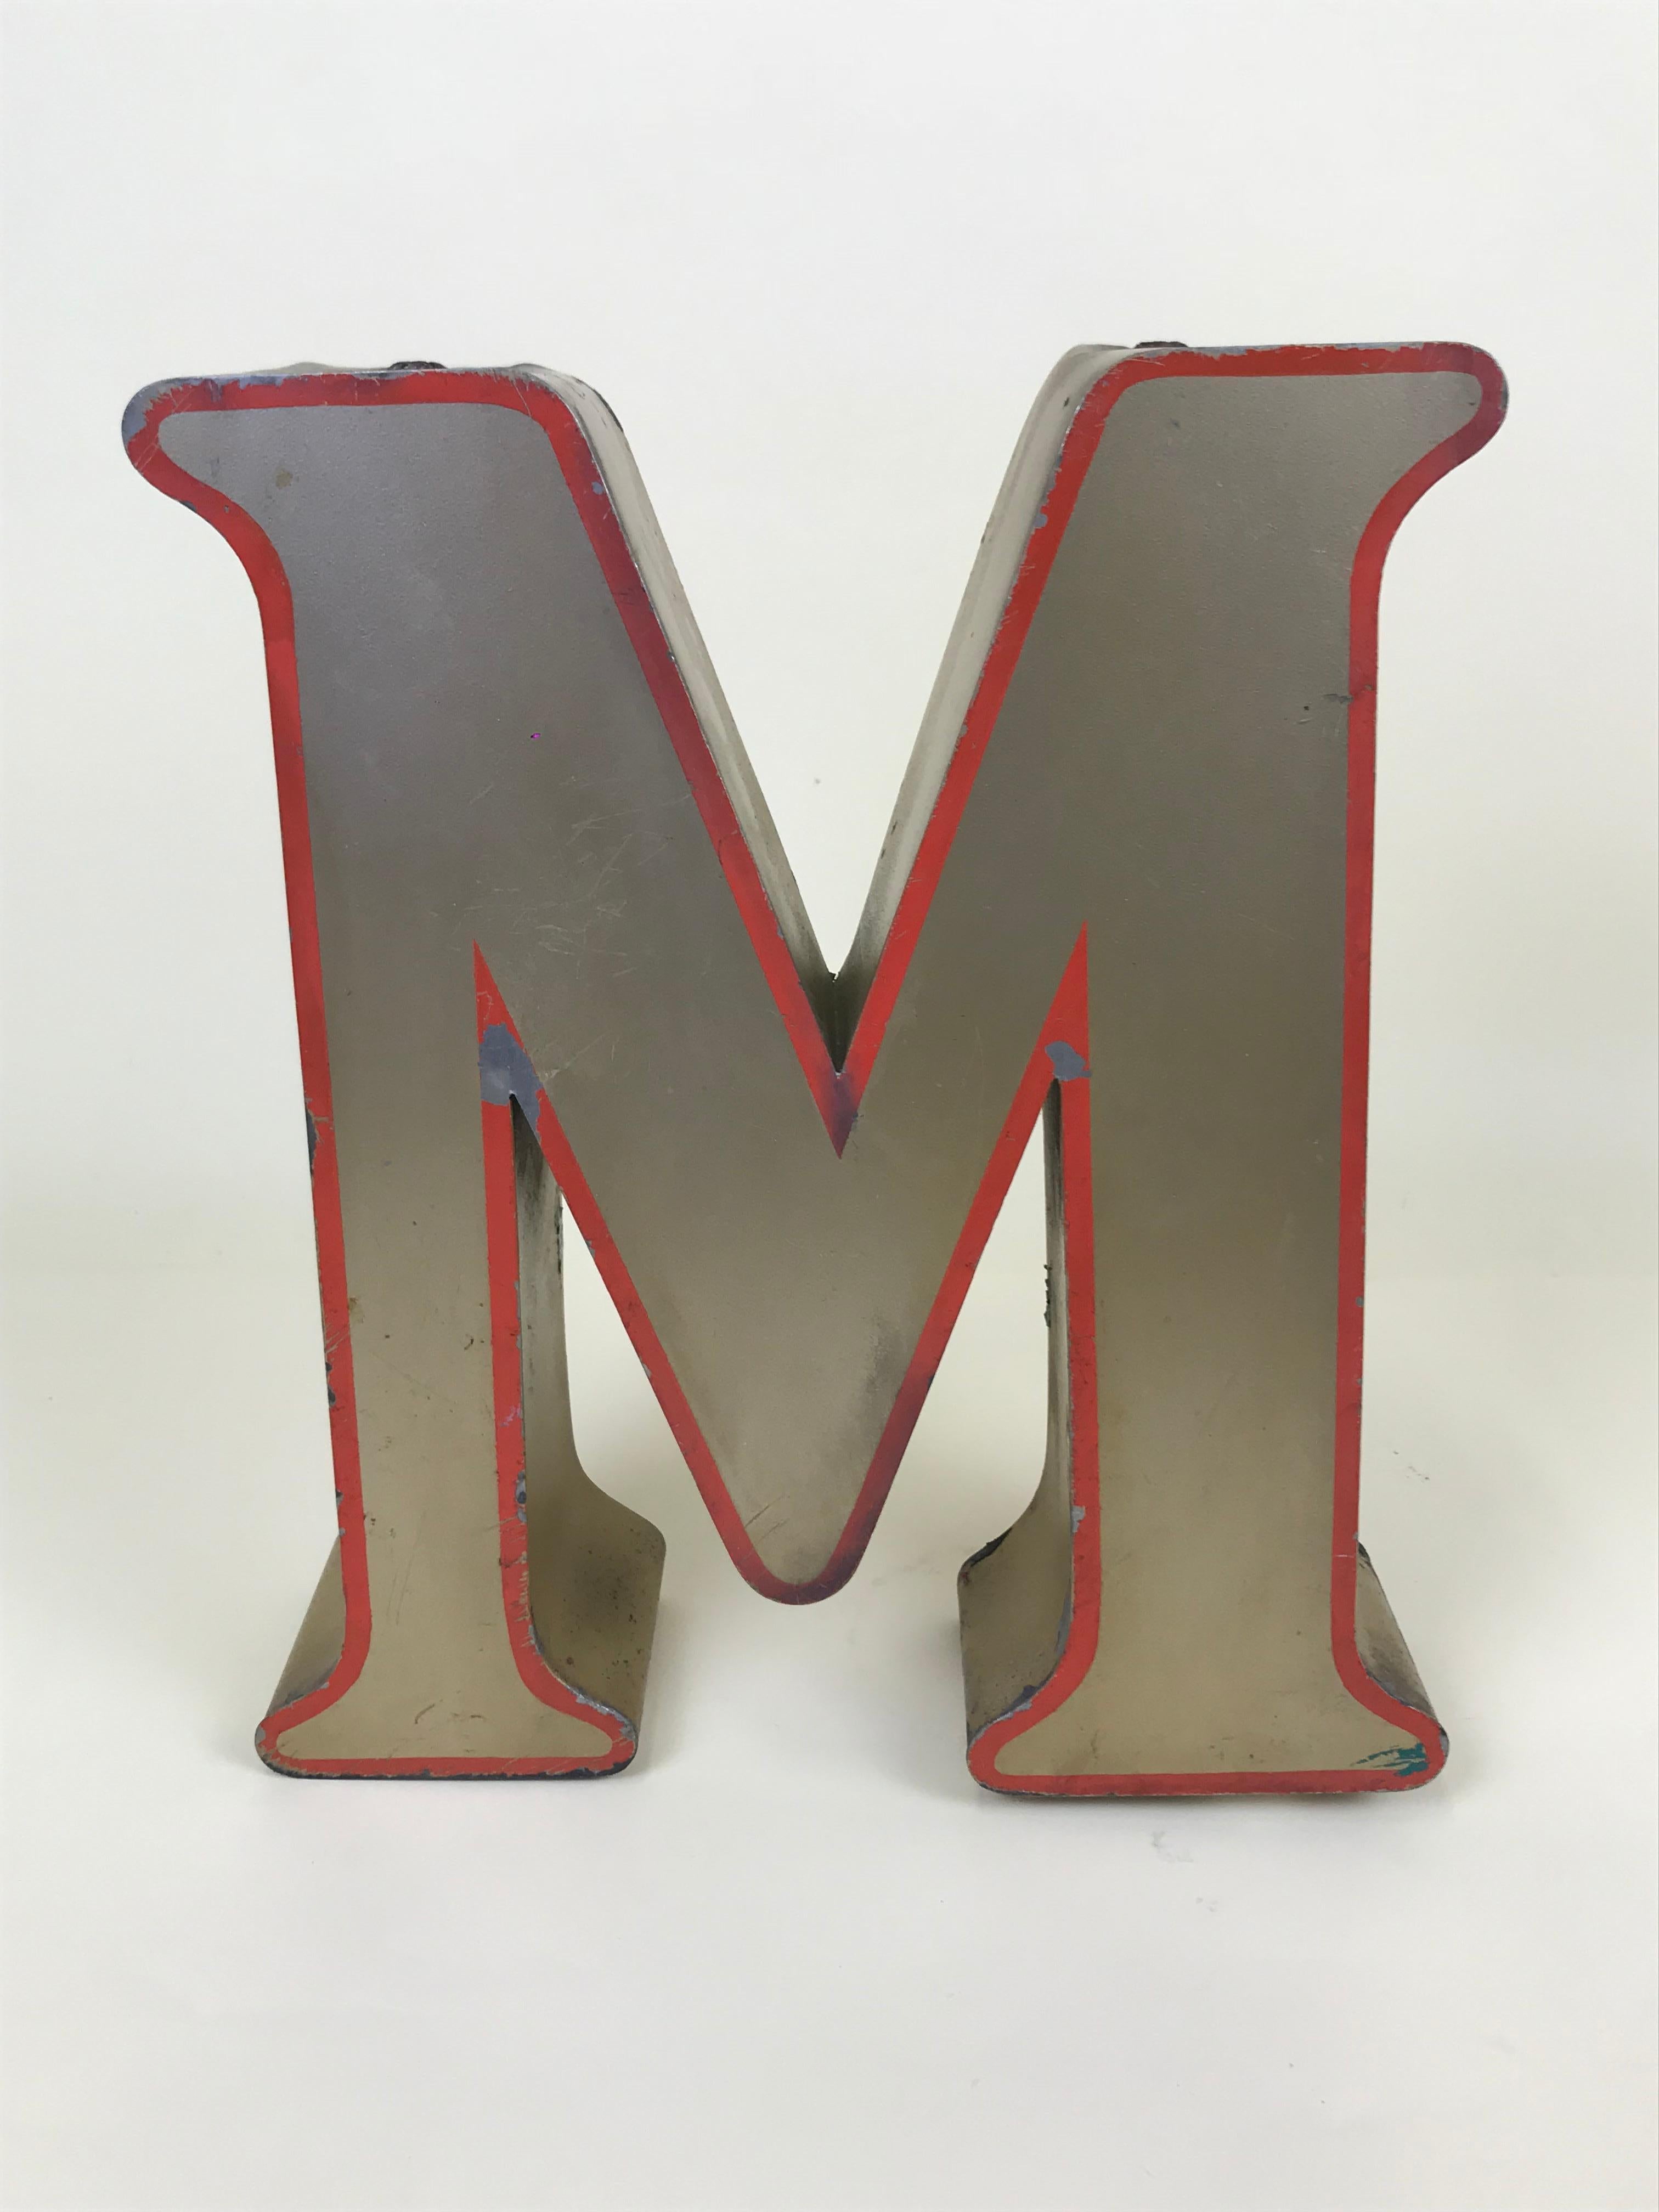 1970s large English vintage metal capital letter M in bronze color with red profile.
 